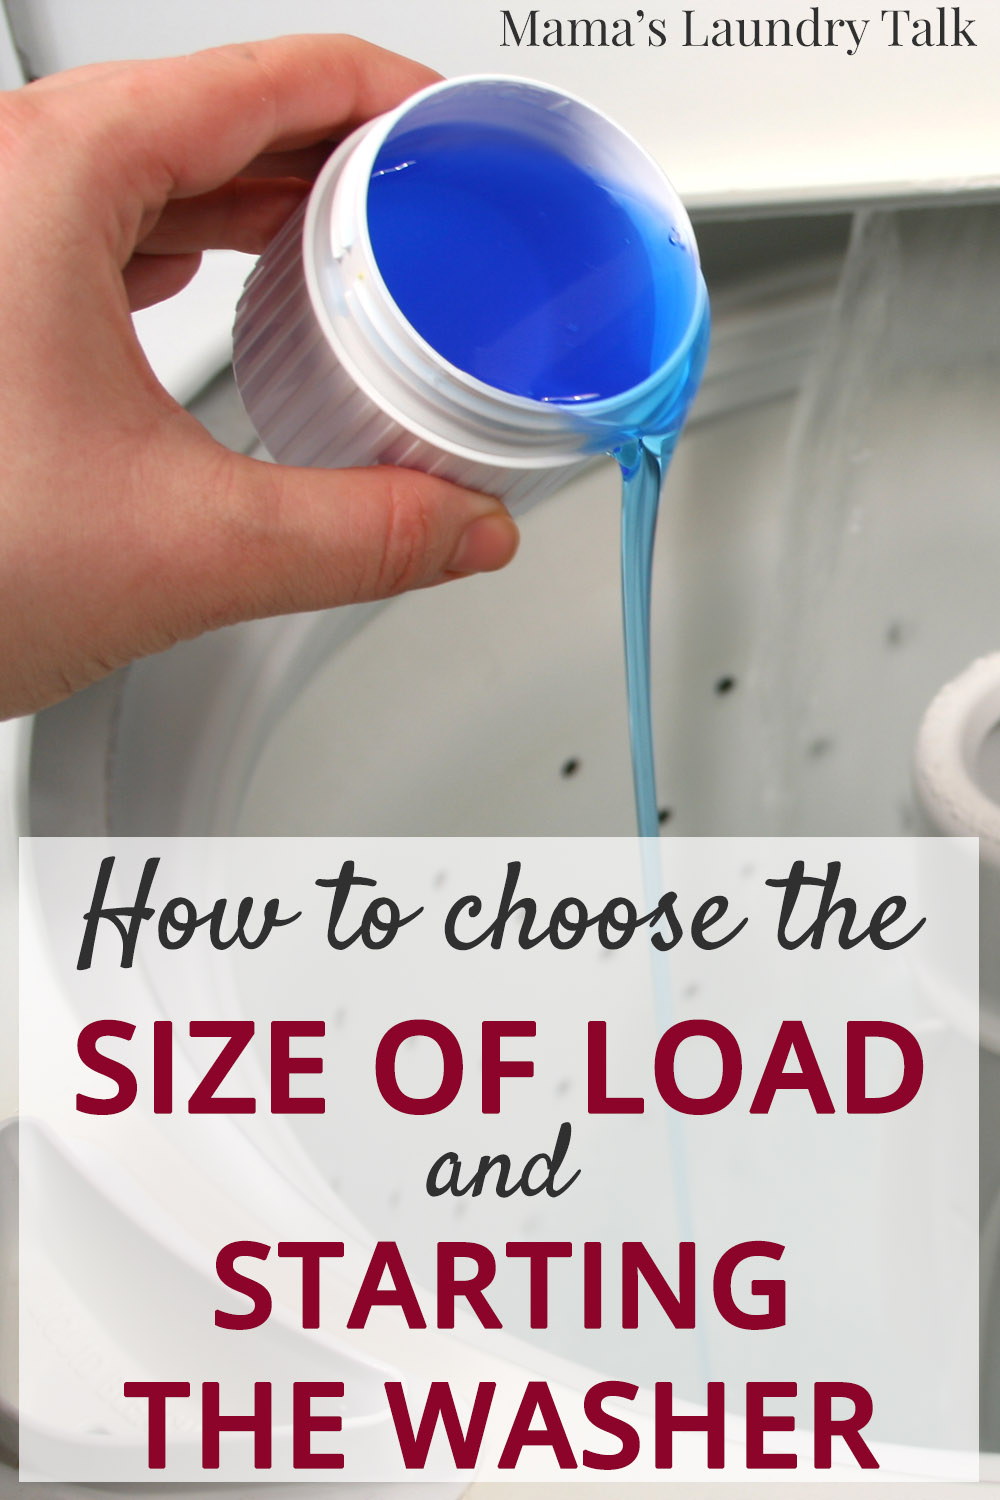 How to Choose the Size of Laundry Loads and Starting the Washing Machine